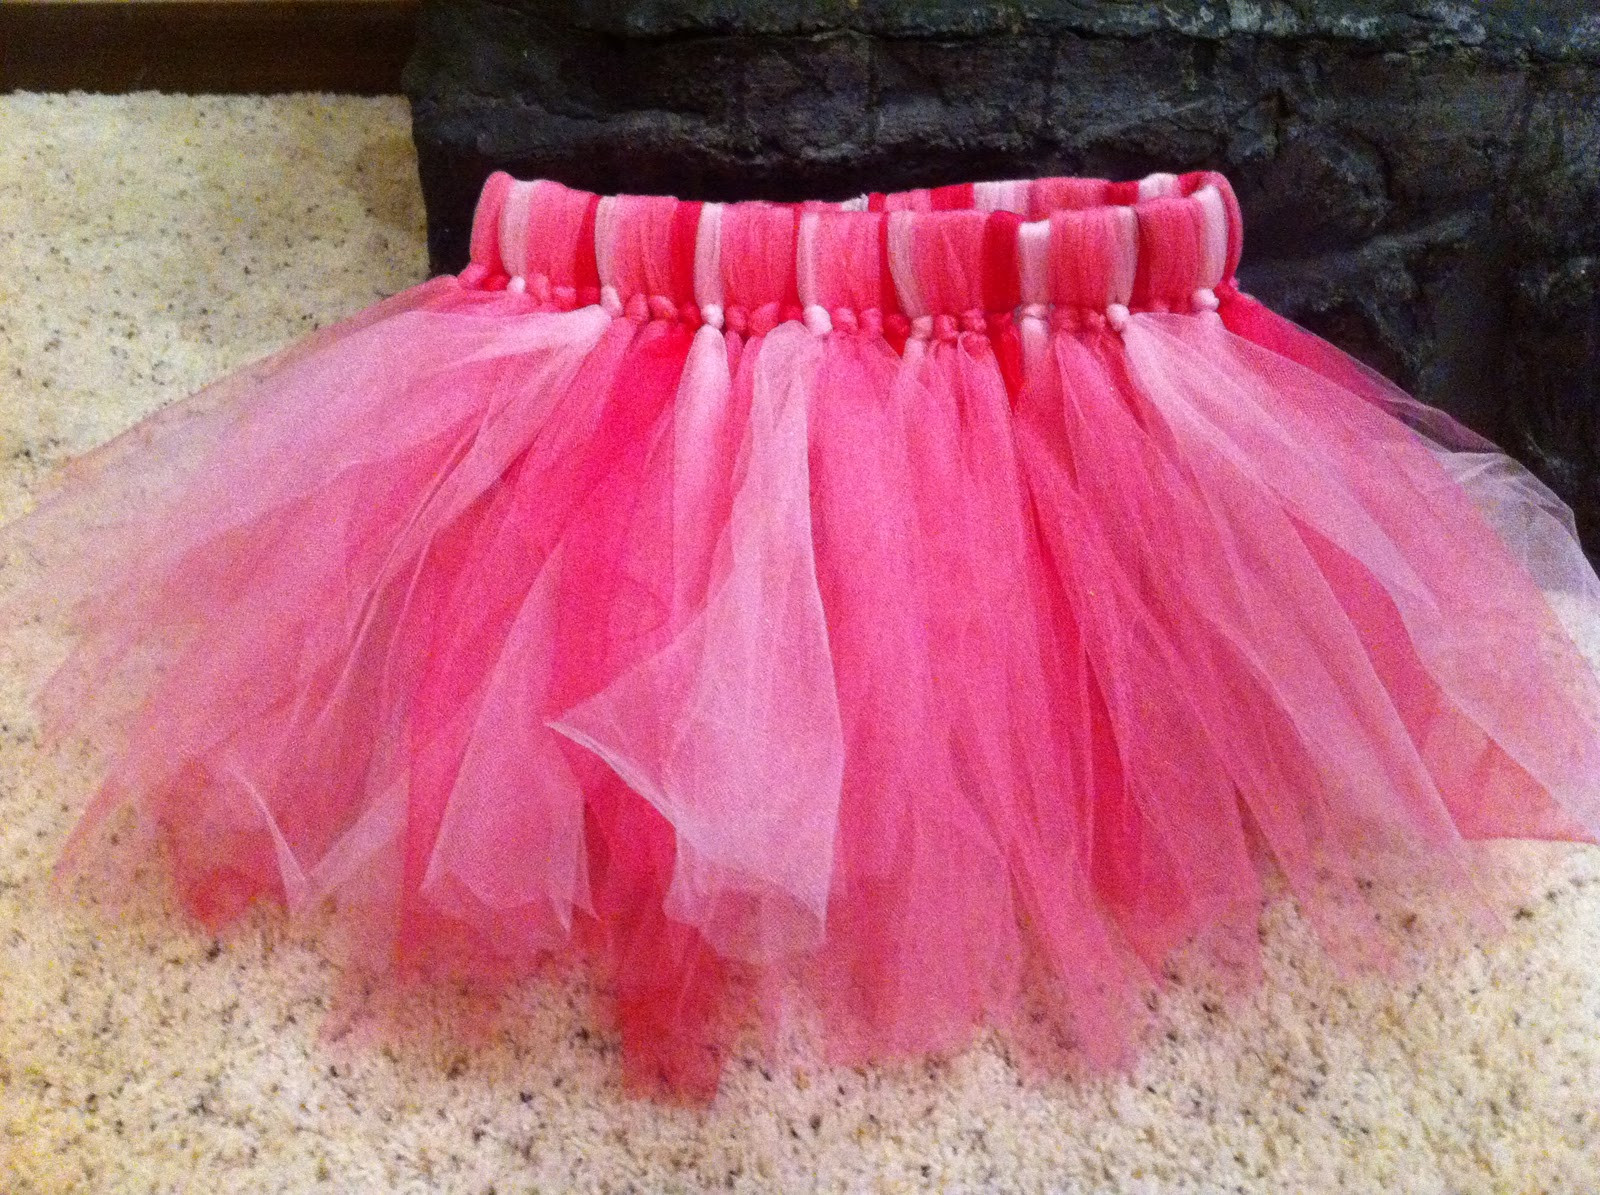 DIY Toddler Tutu
 DIY Valentine s Day Projects Handmade Tulle Skirt for $7